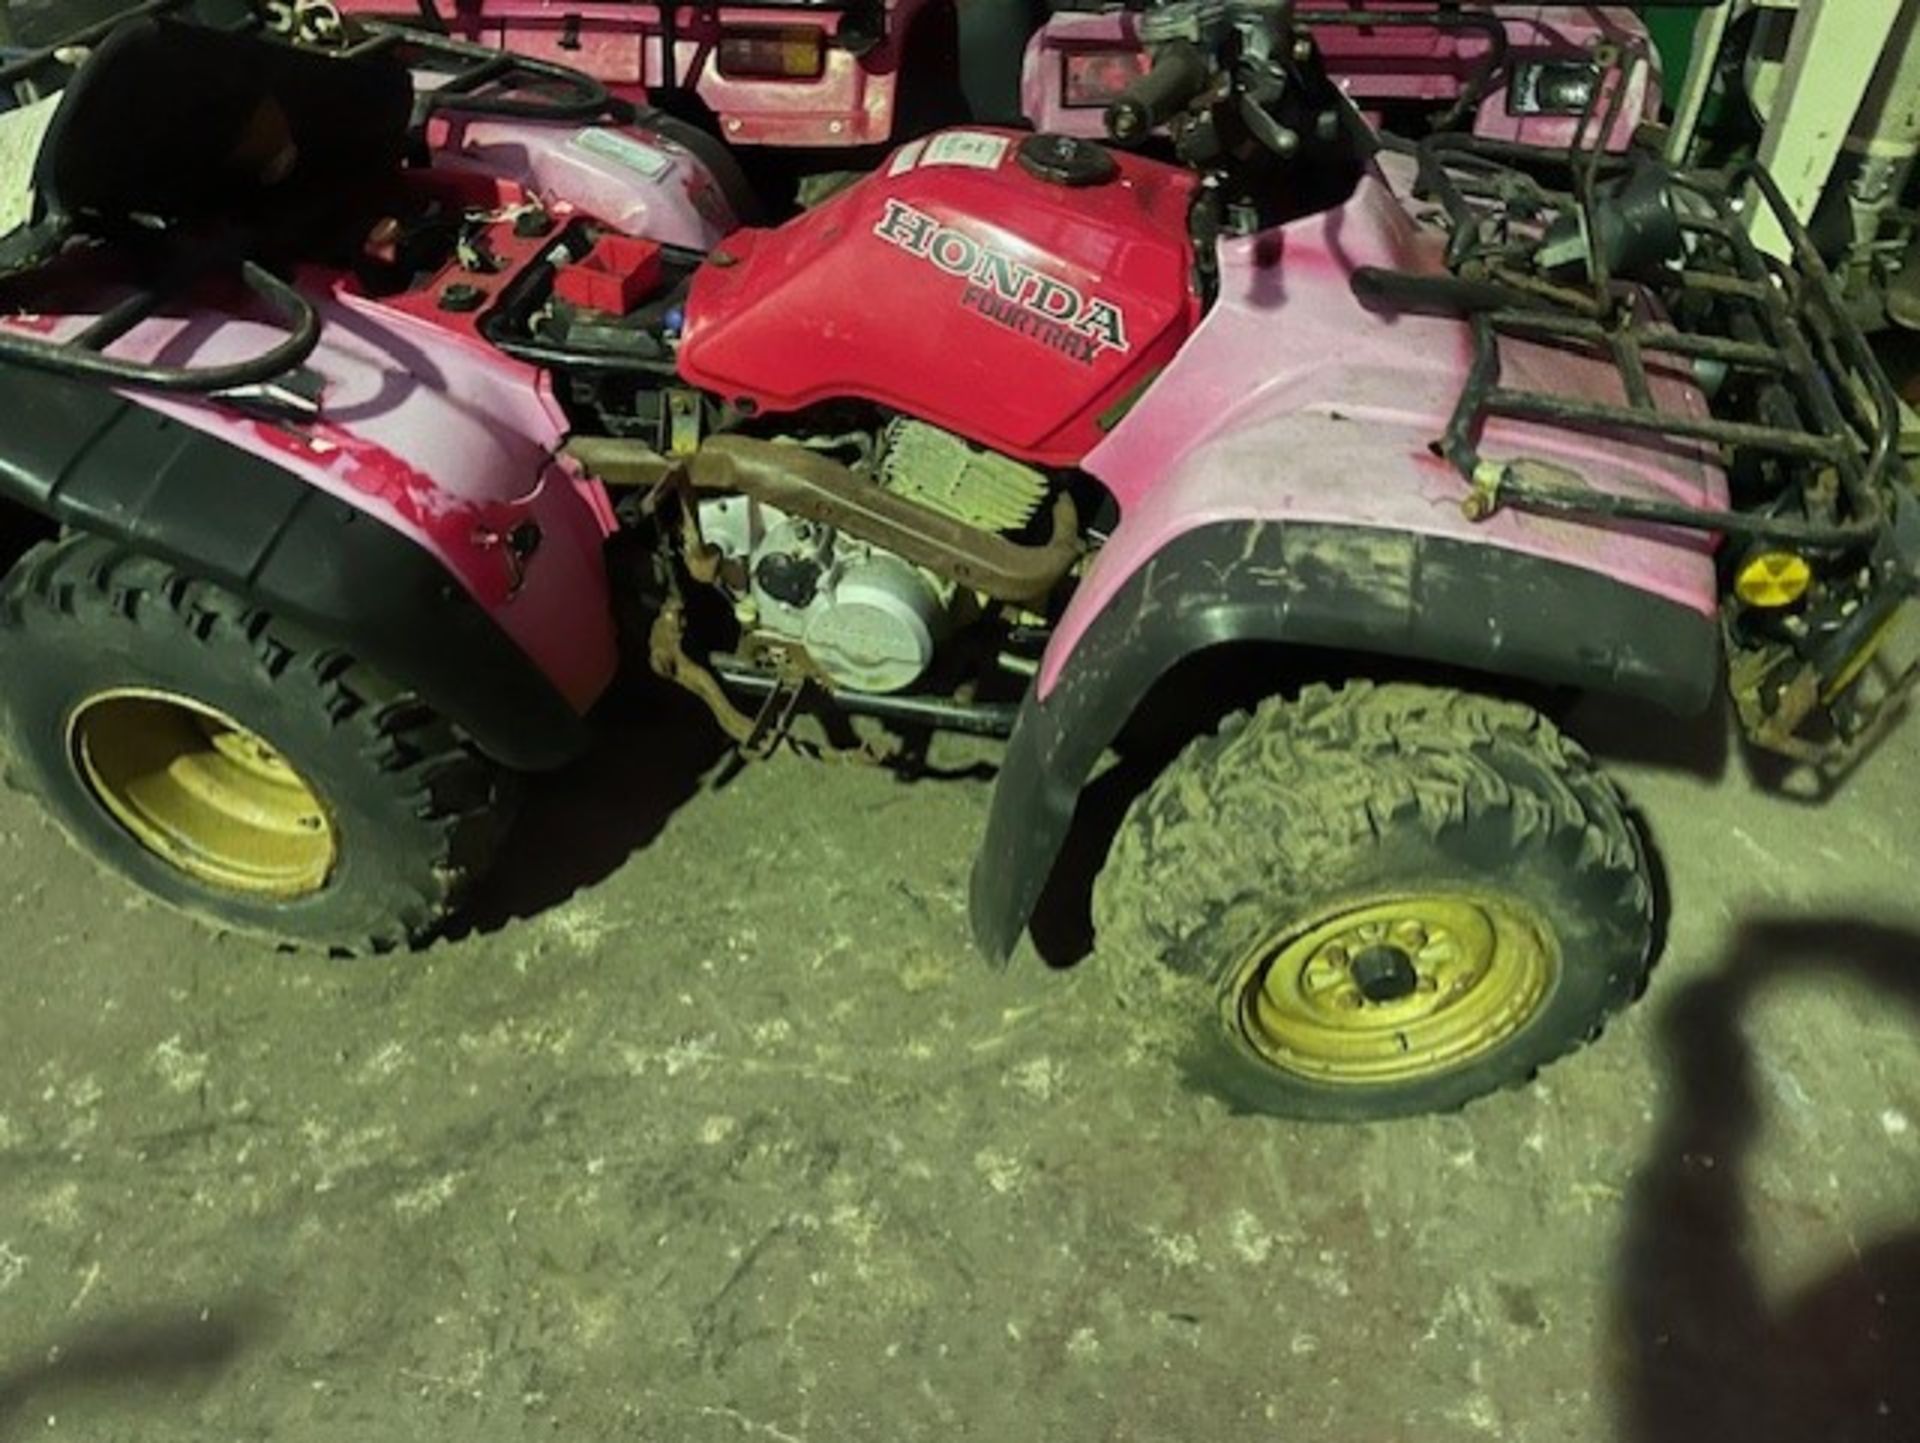 Quad bike fortrax Honda 400 non runner needs tlc - no documents but it has been registered by